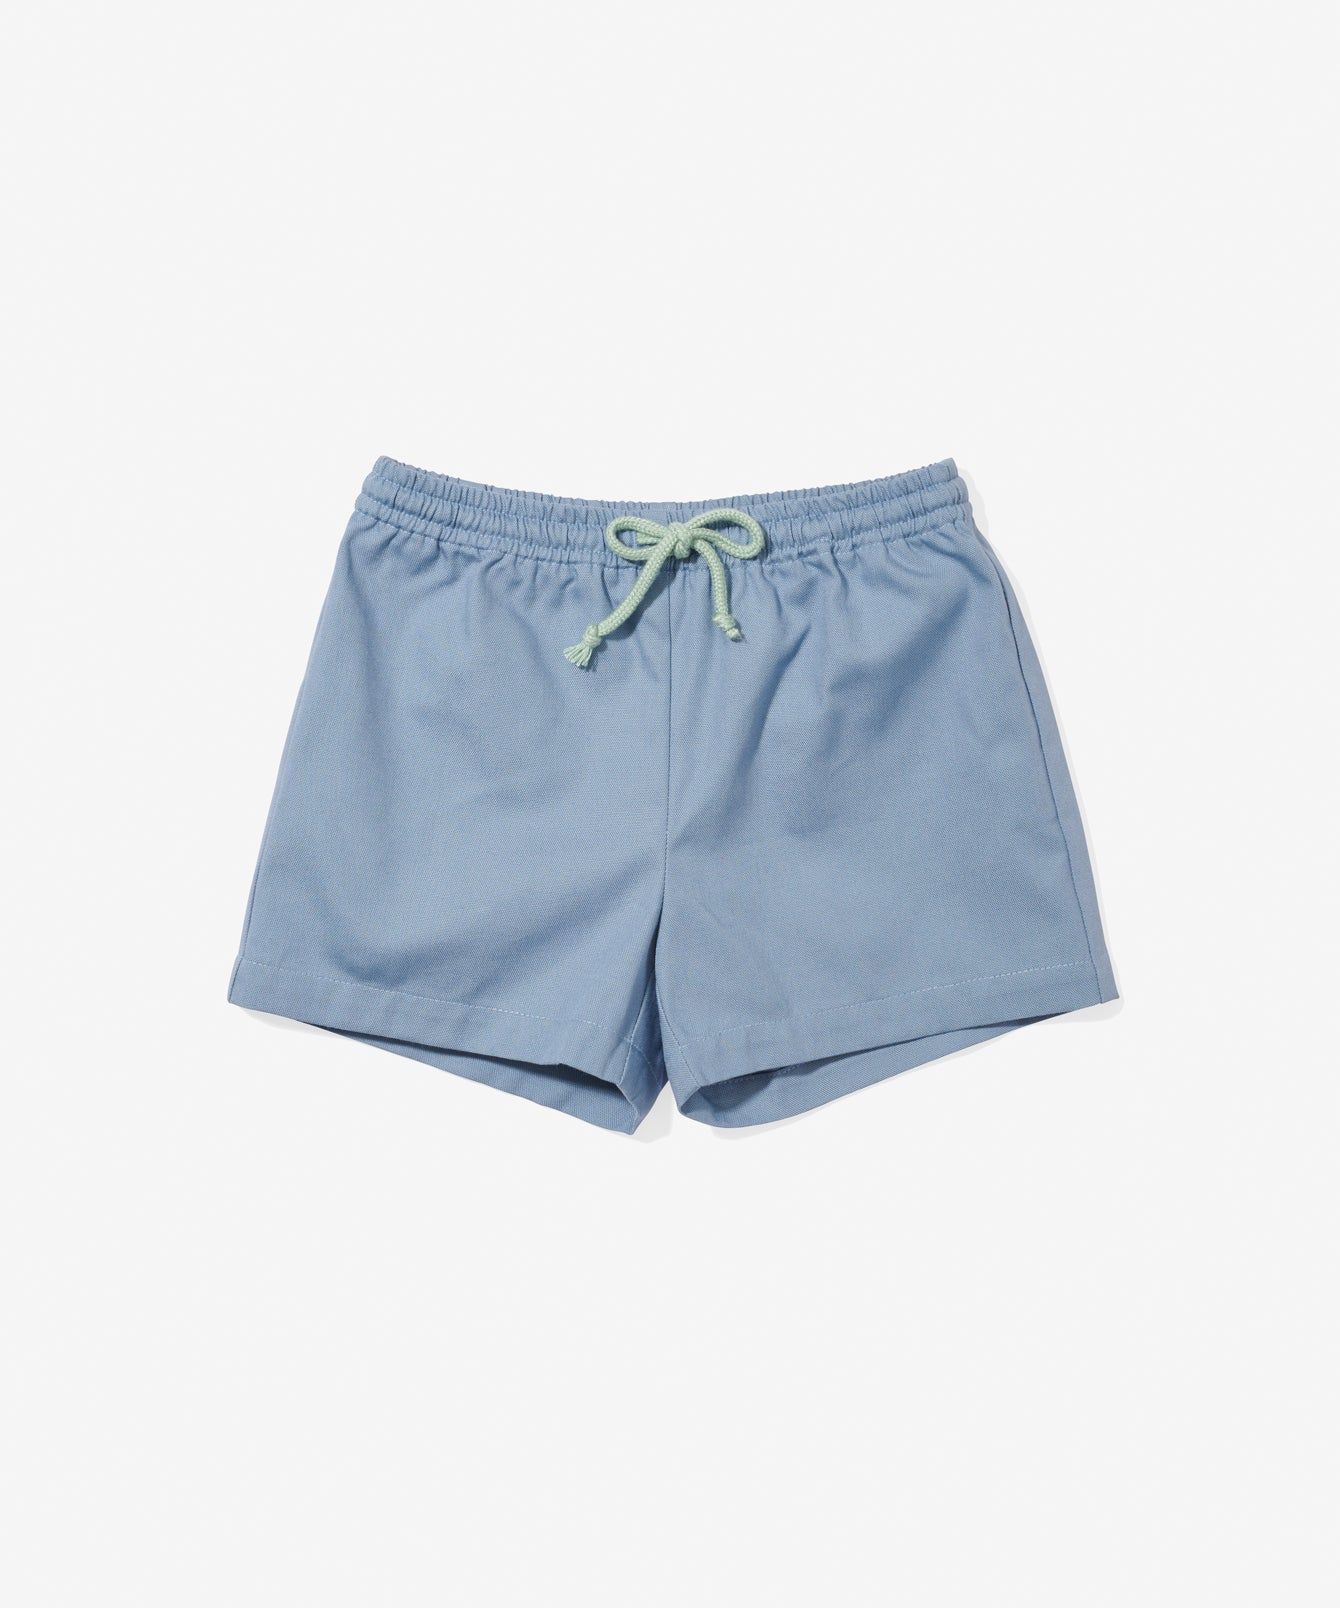 Girls and Boys summer short in Dusty Blue | Oso and Me | Oso & Me